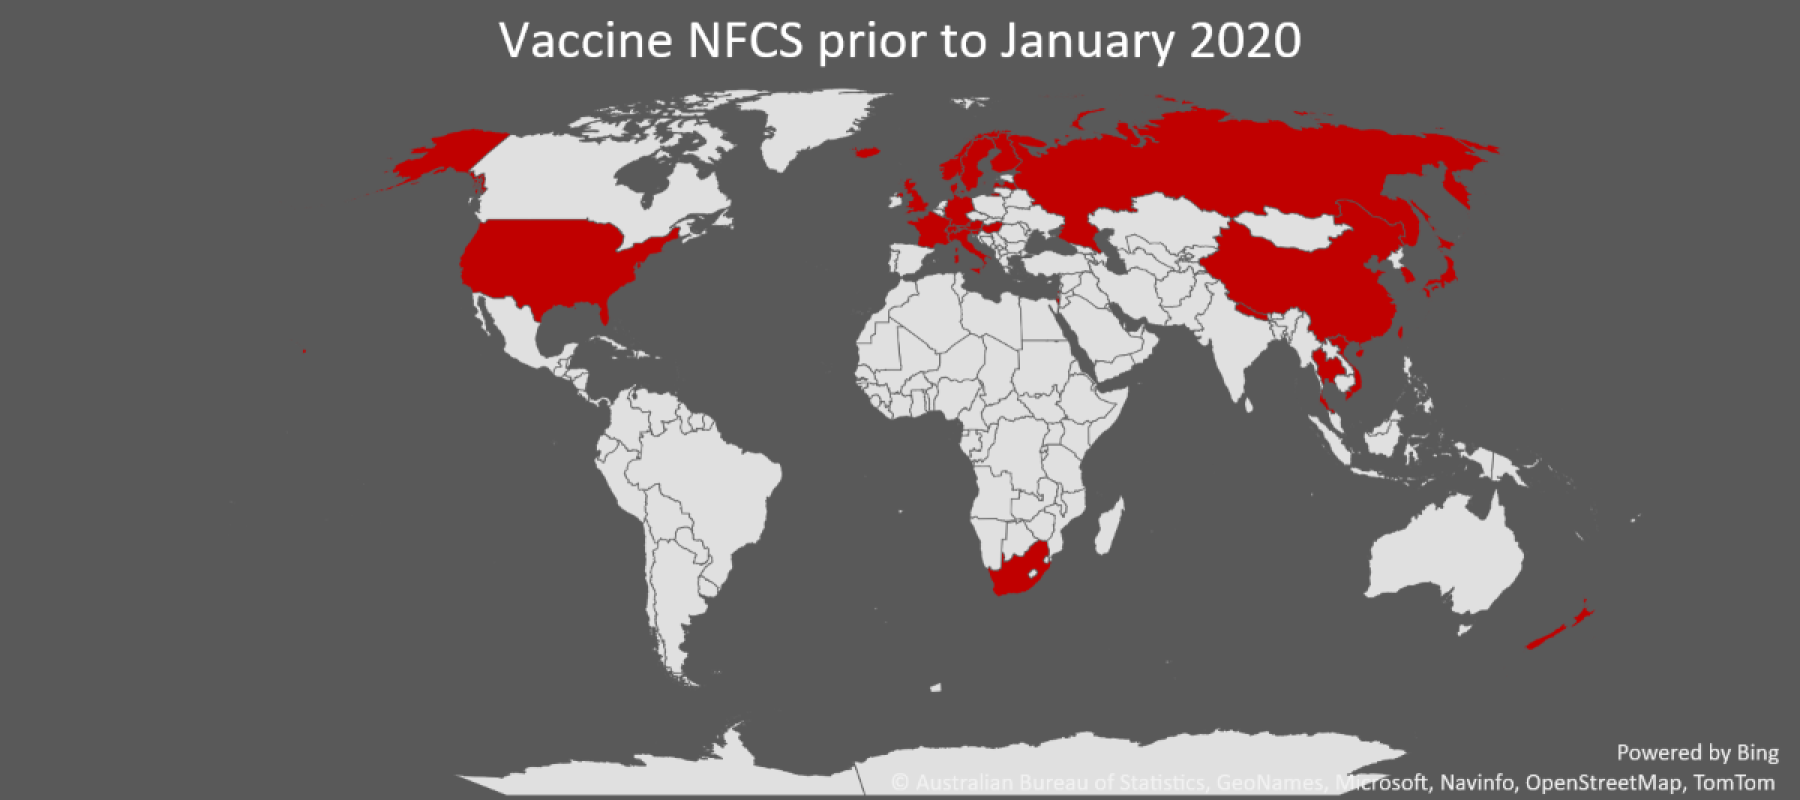 World map showing countries with a Vaccine no-fault compensation scheme operating prior to January 2020